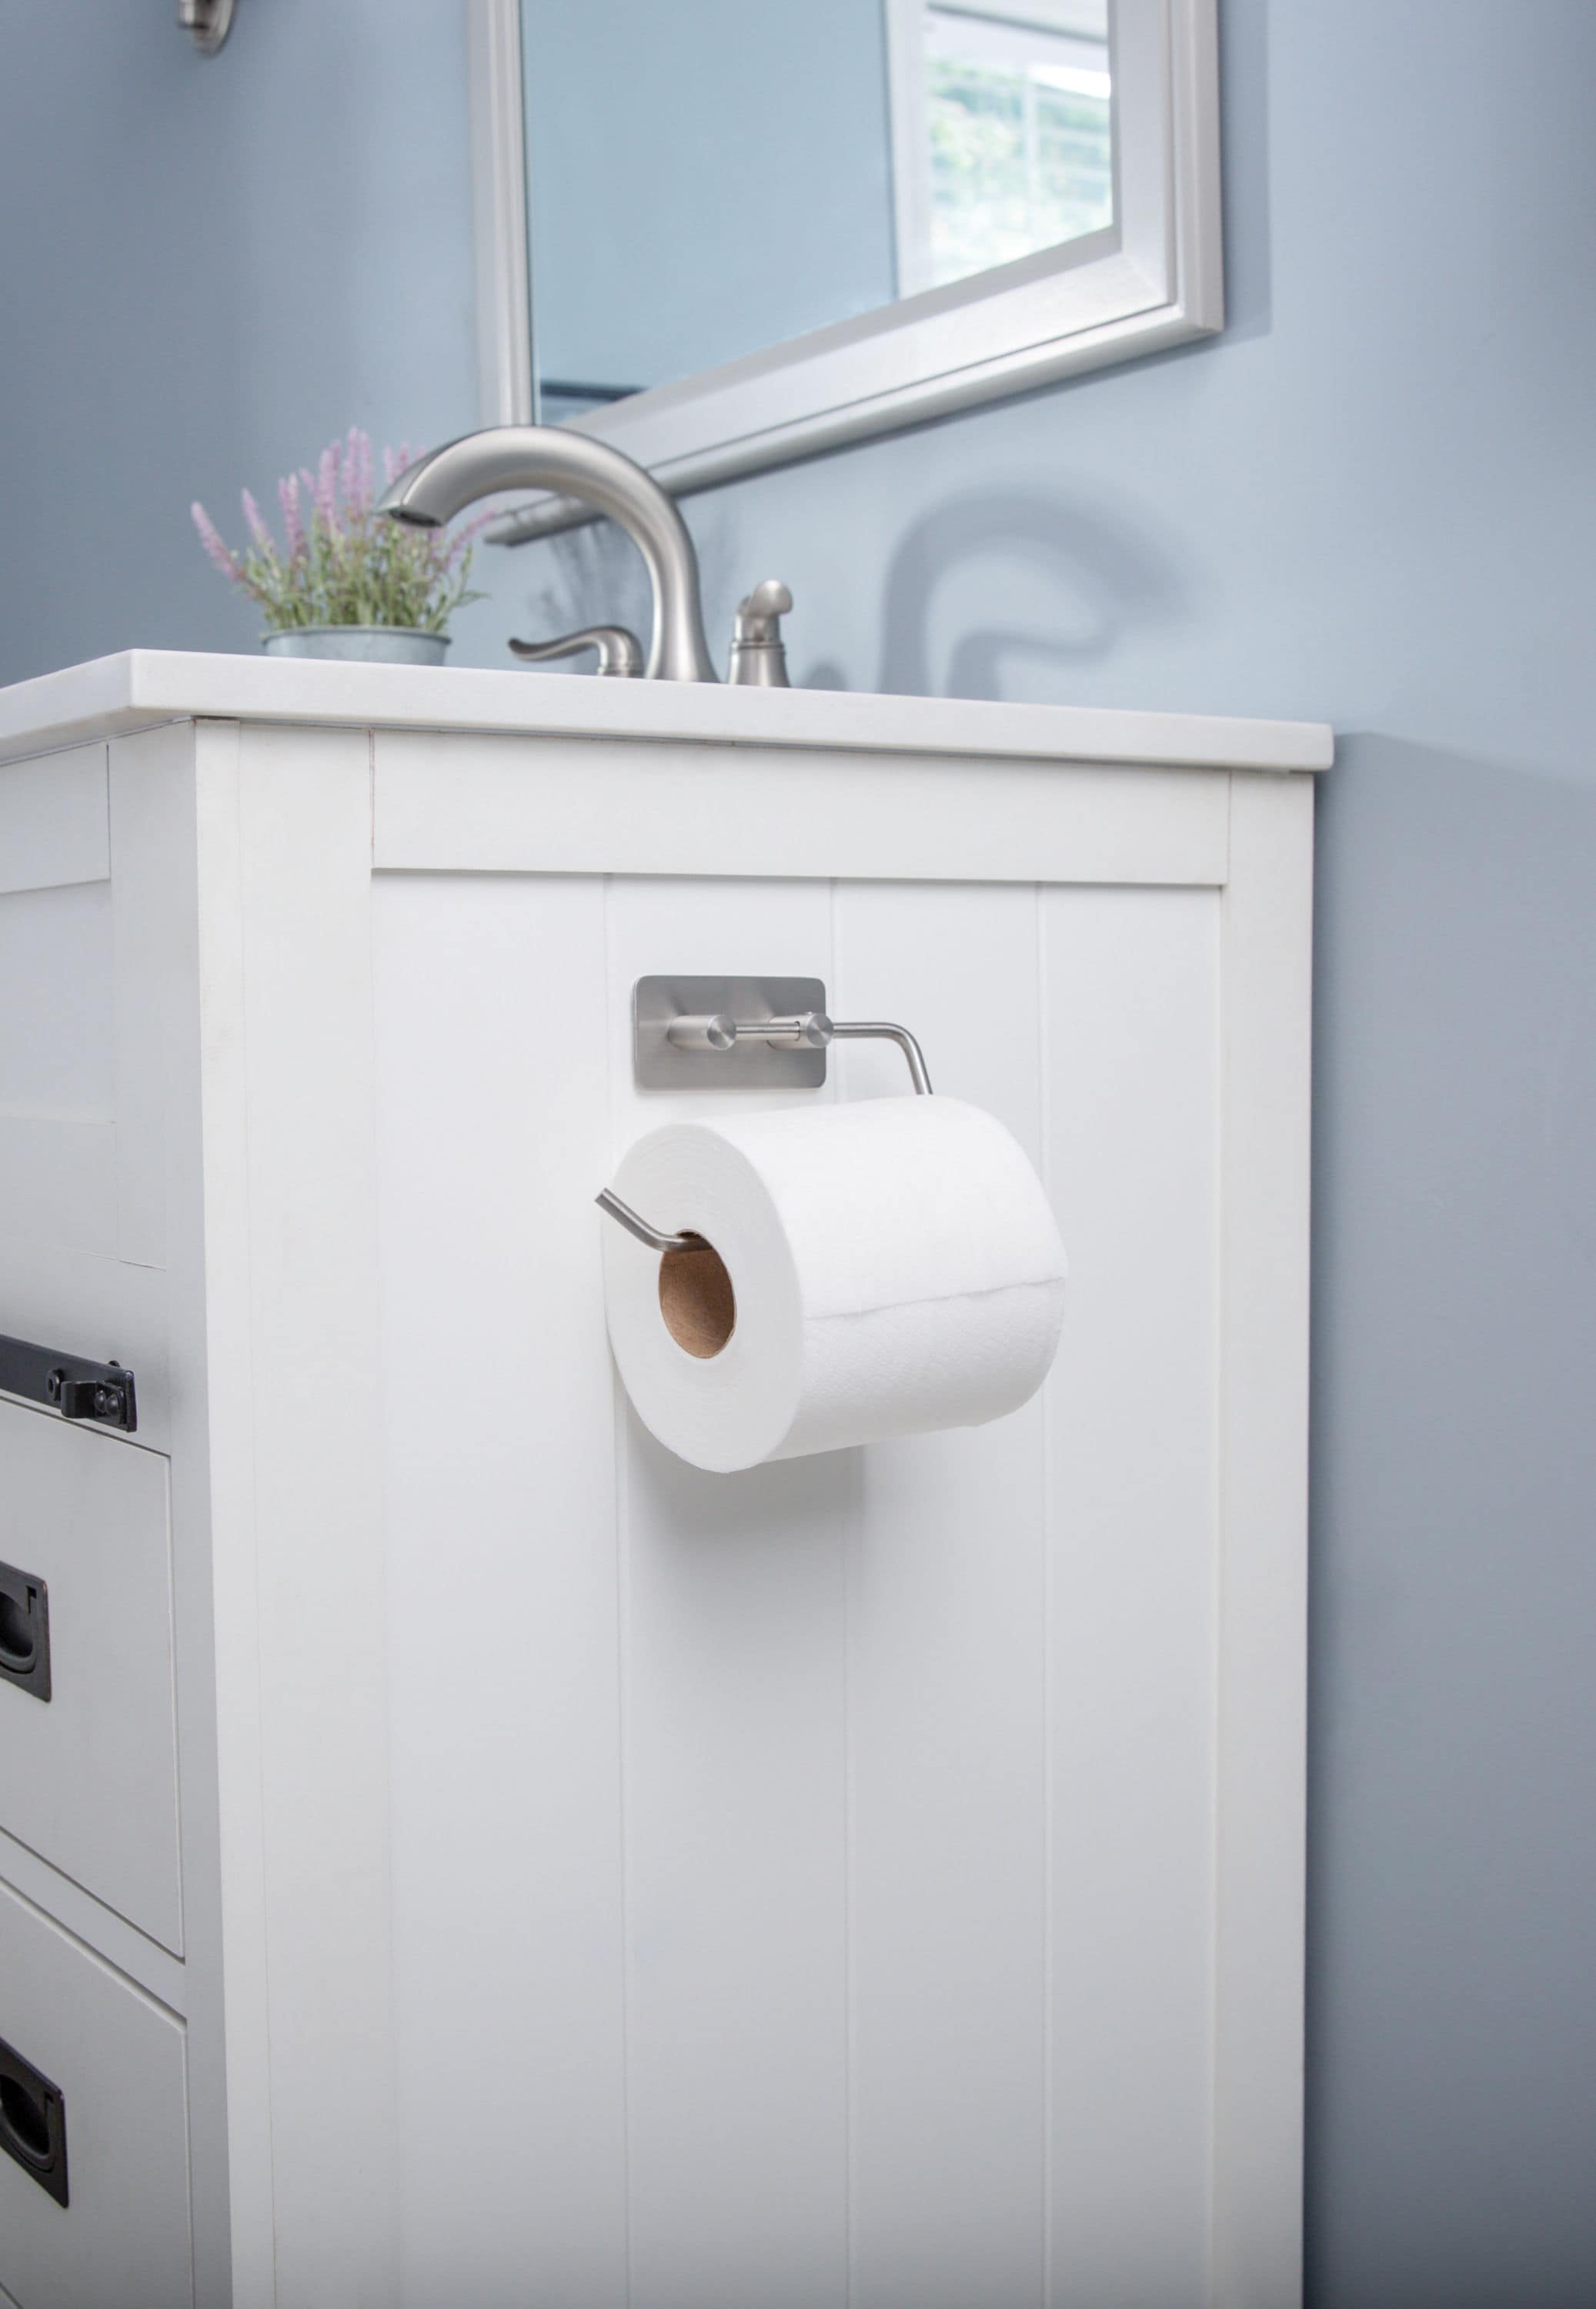 Is There An Ideal Place To Mount Your Toilet Paper Holder In A Bathroom?